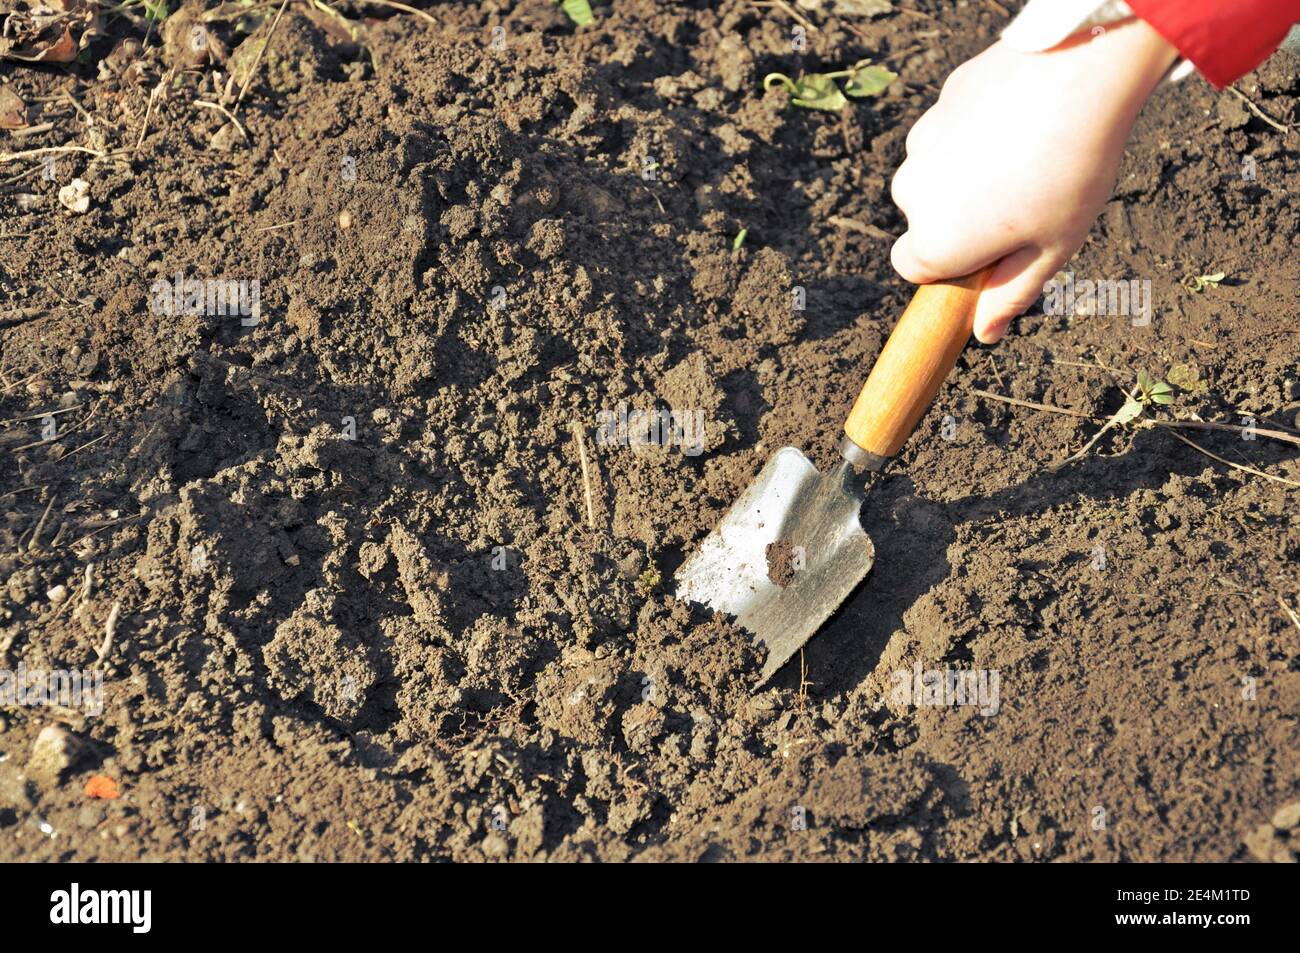 Child hand digging in soil for seeding plants in spring. Stock Photo